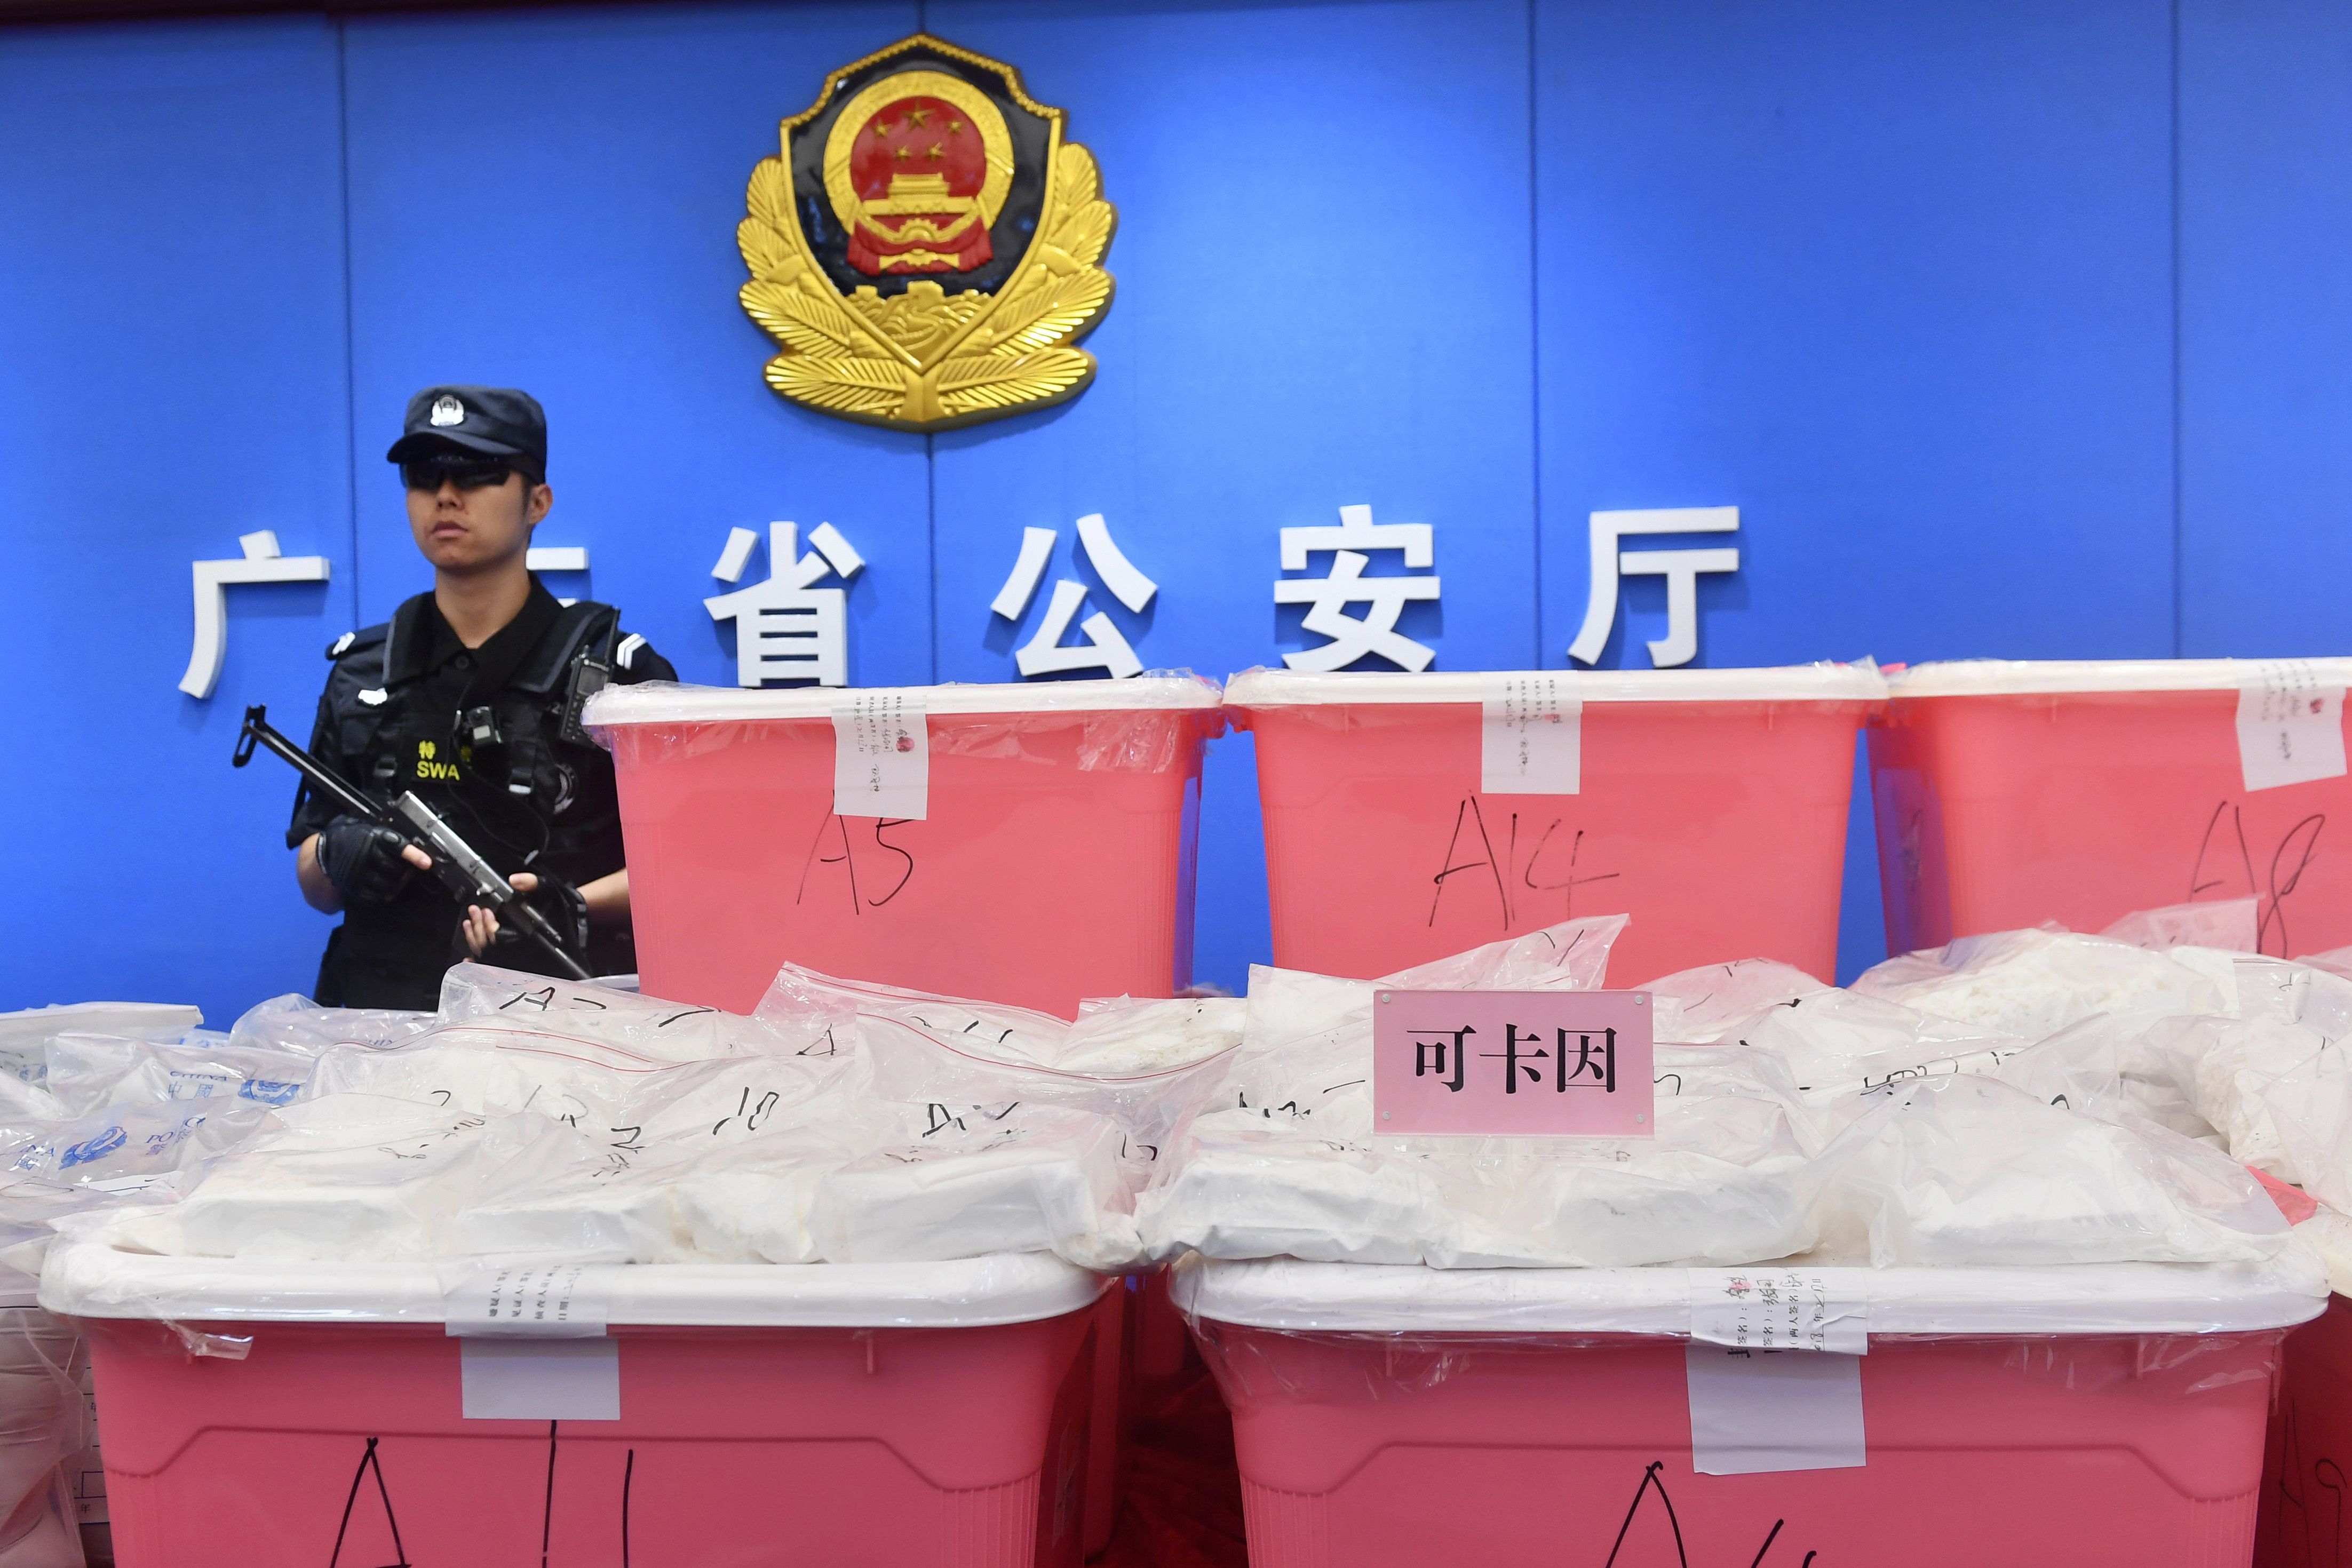 A policeman stands guard next to bags of cocaine seized in Guangzhou in China's southern Guangdong province on April 24, 2018. (-—AFP/Getty Images)